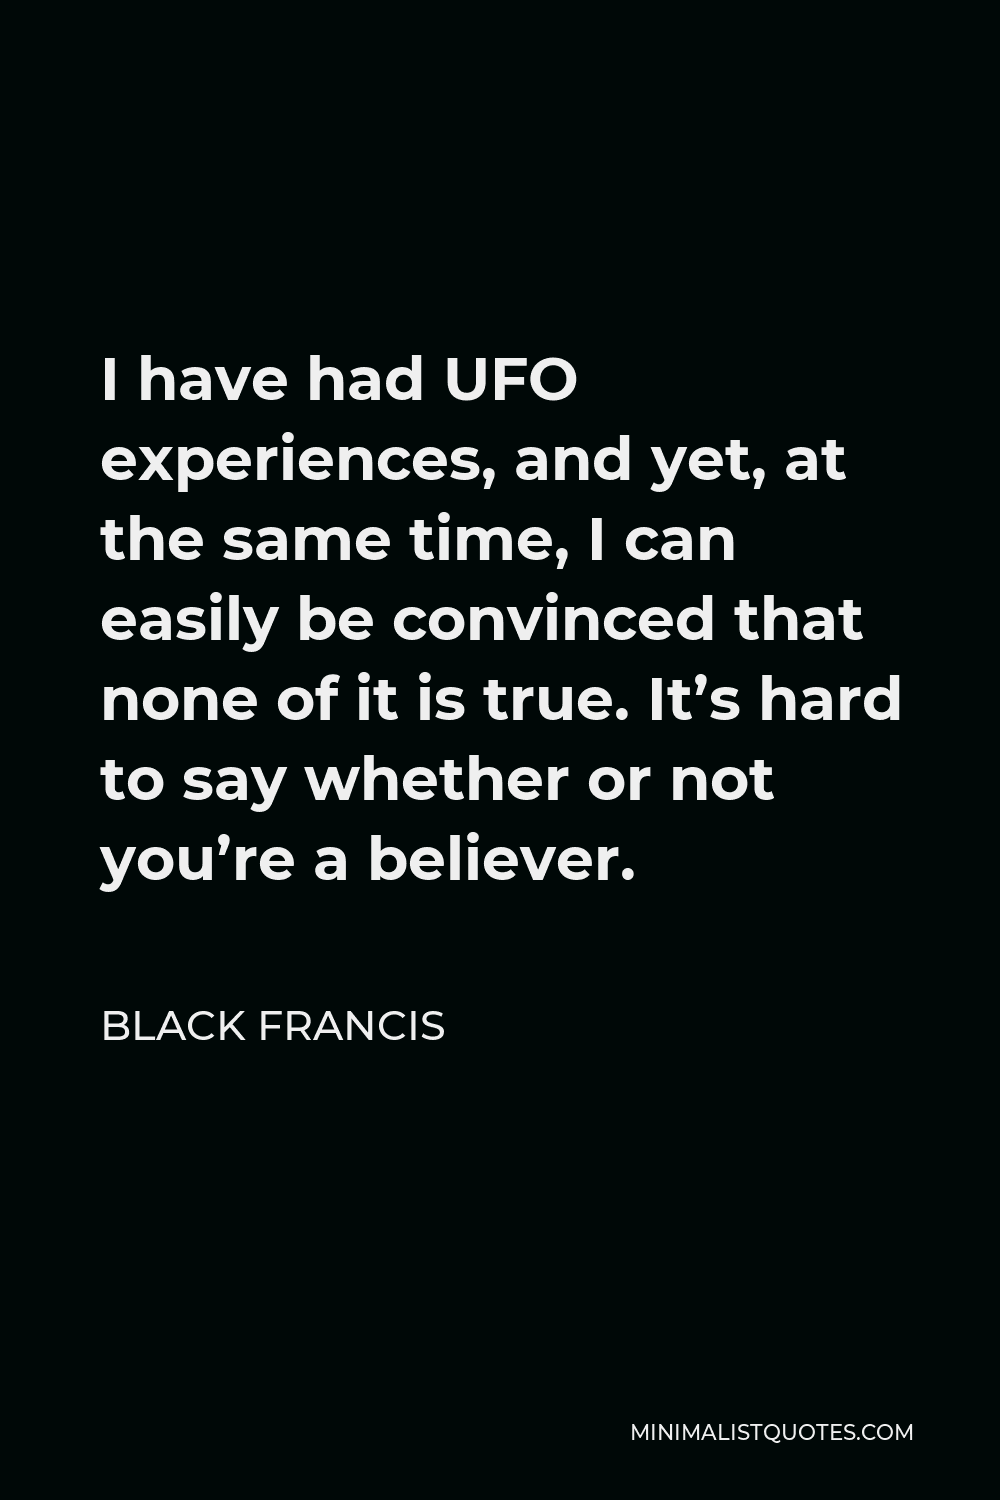 Black Francis Quote - I have had UFO experiences, and yet, at the same time, I can easily be convinced that none of it is true. It’s hard to say whether or not you’re a believer.